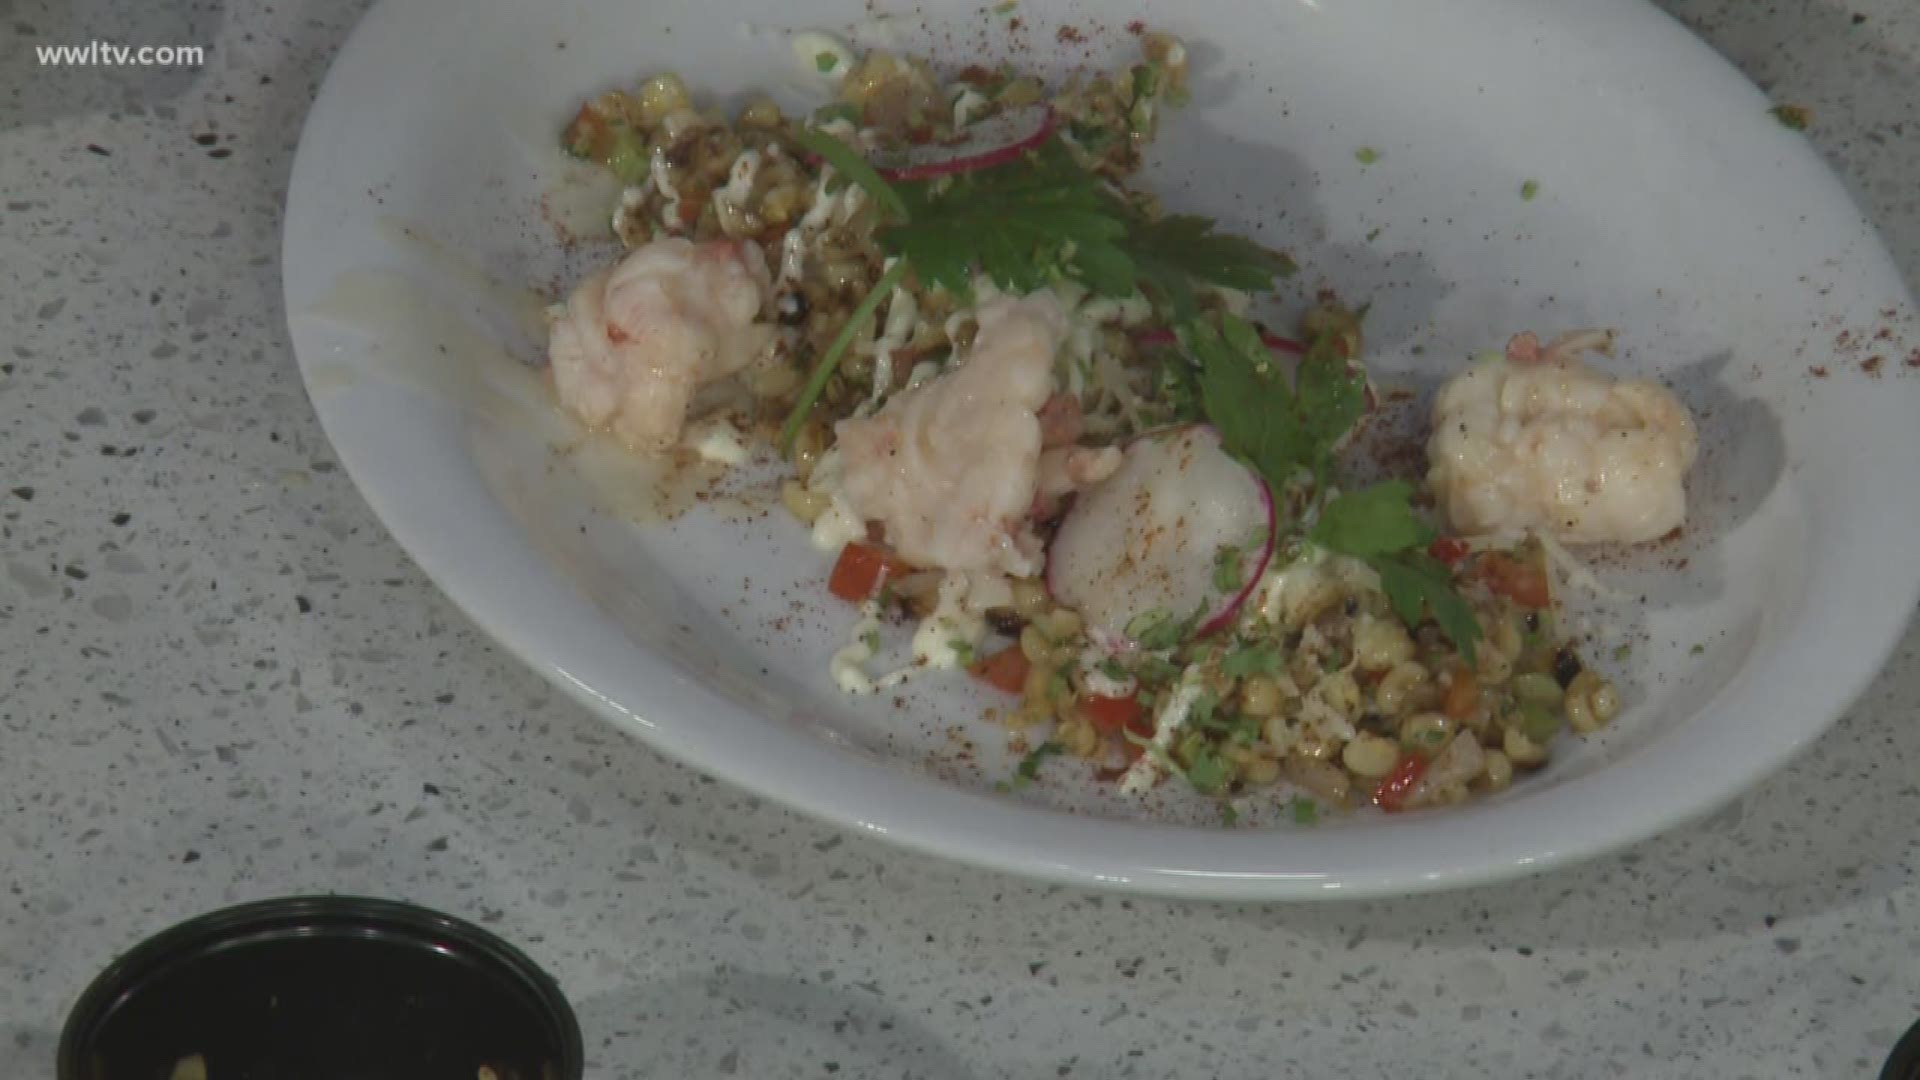 Chef Austin's rendition of Mexican street corn with lobster 